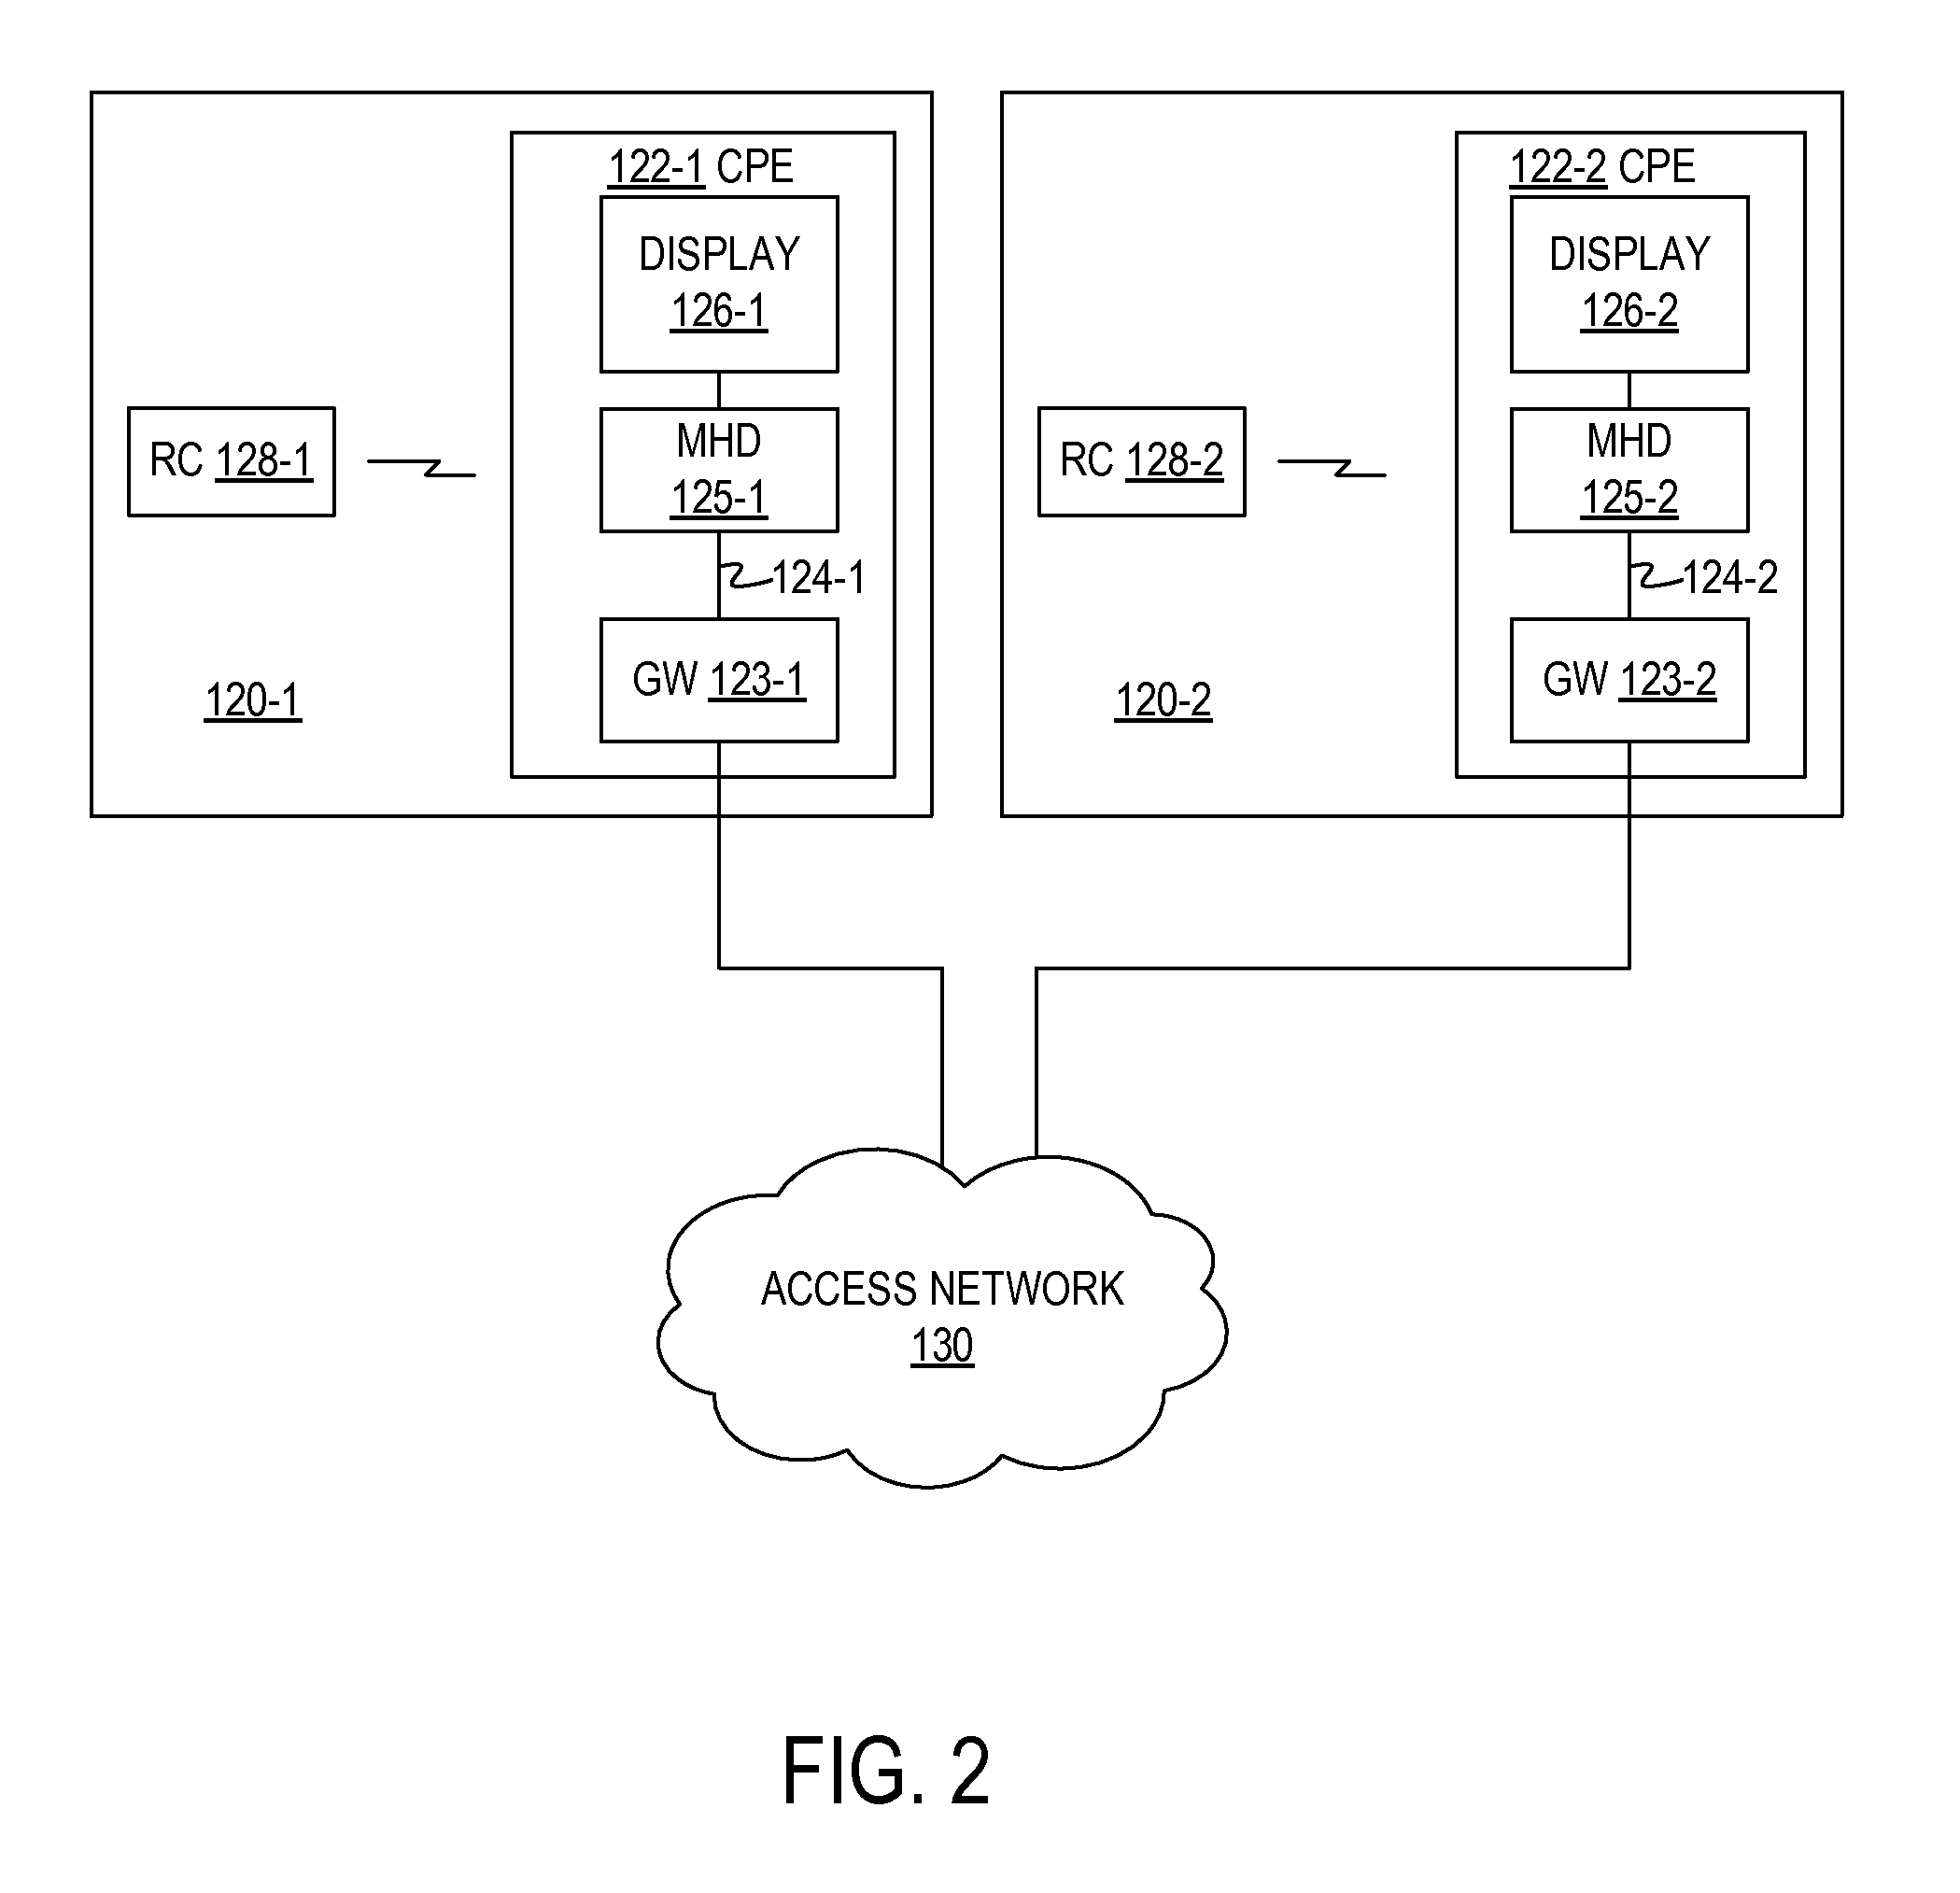 Incident reporting in a multimedia content distribution network